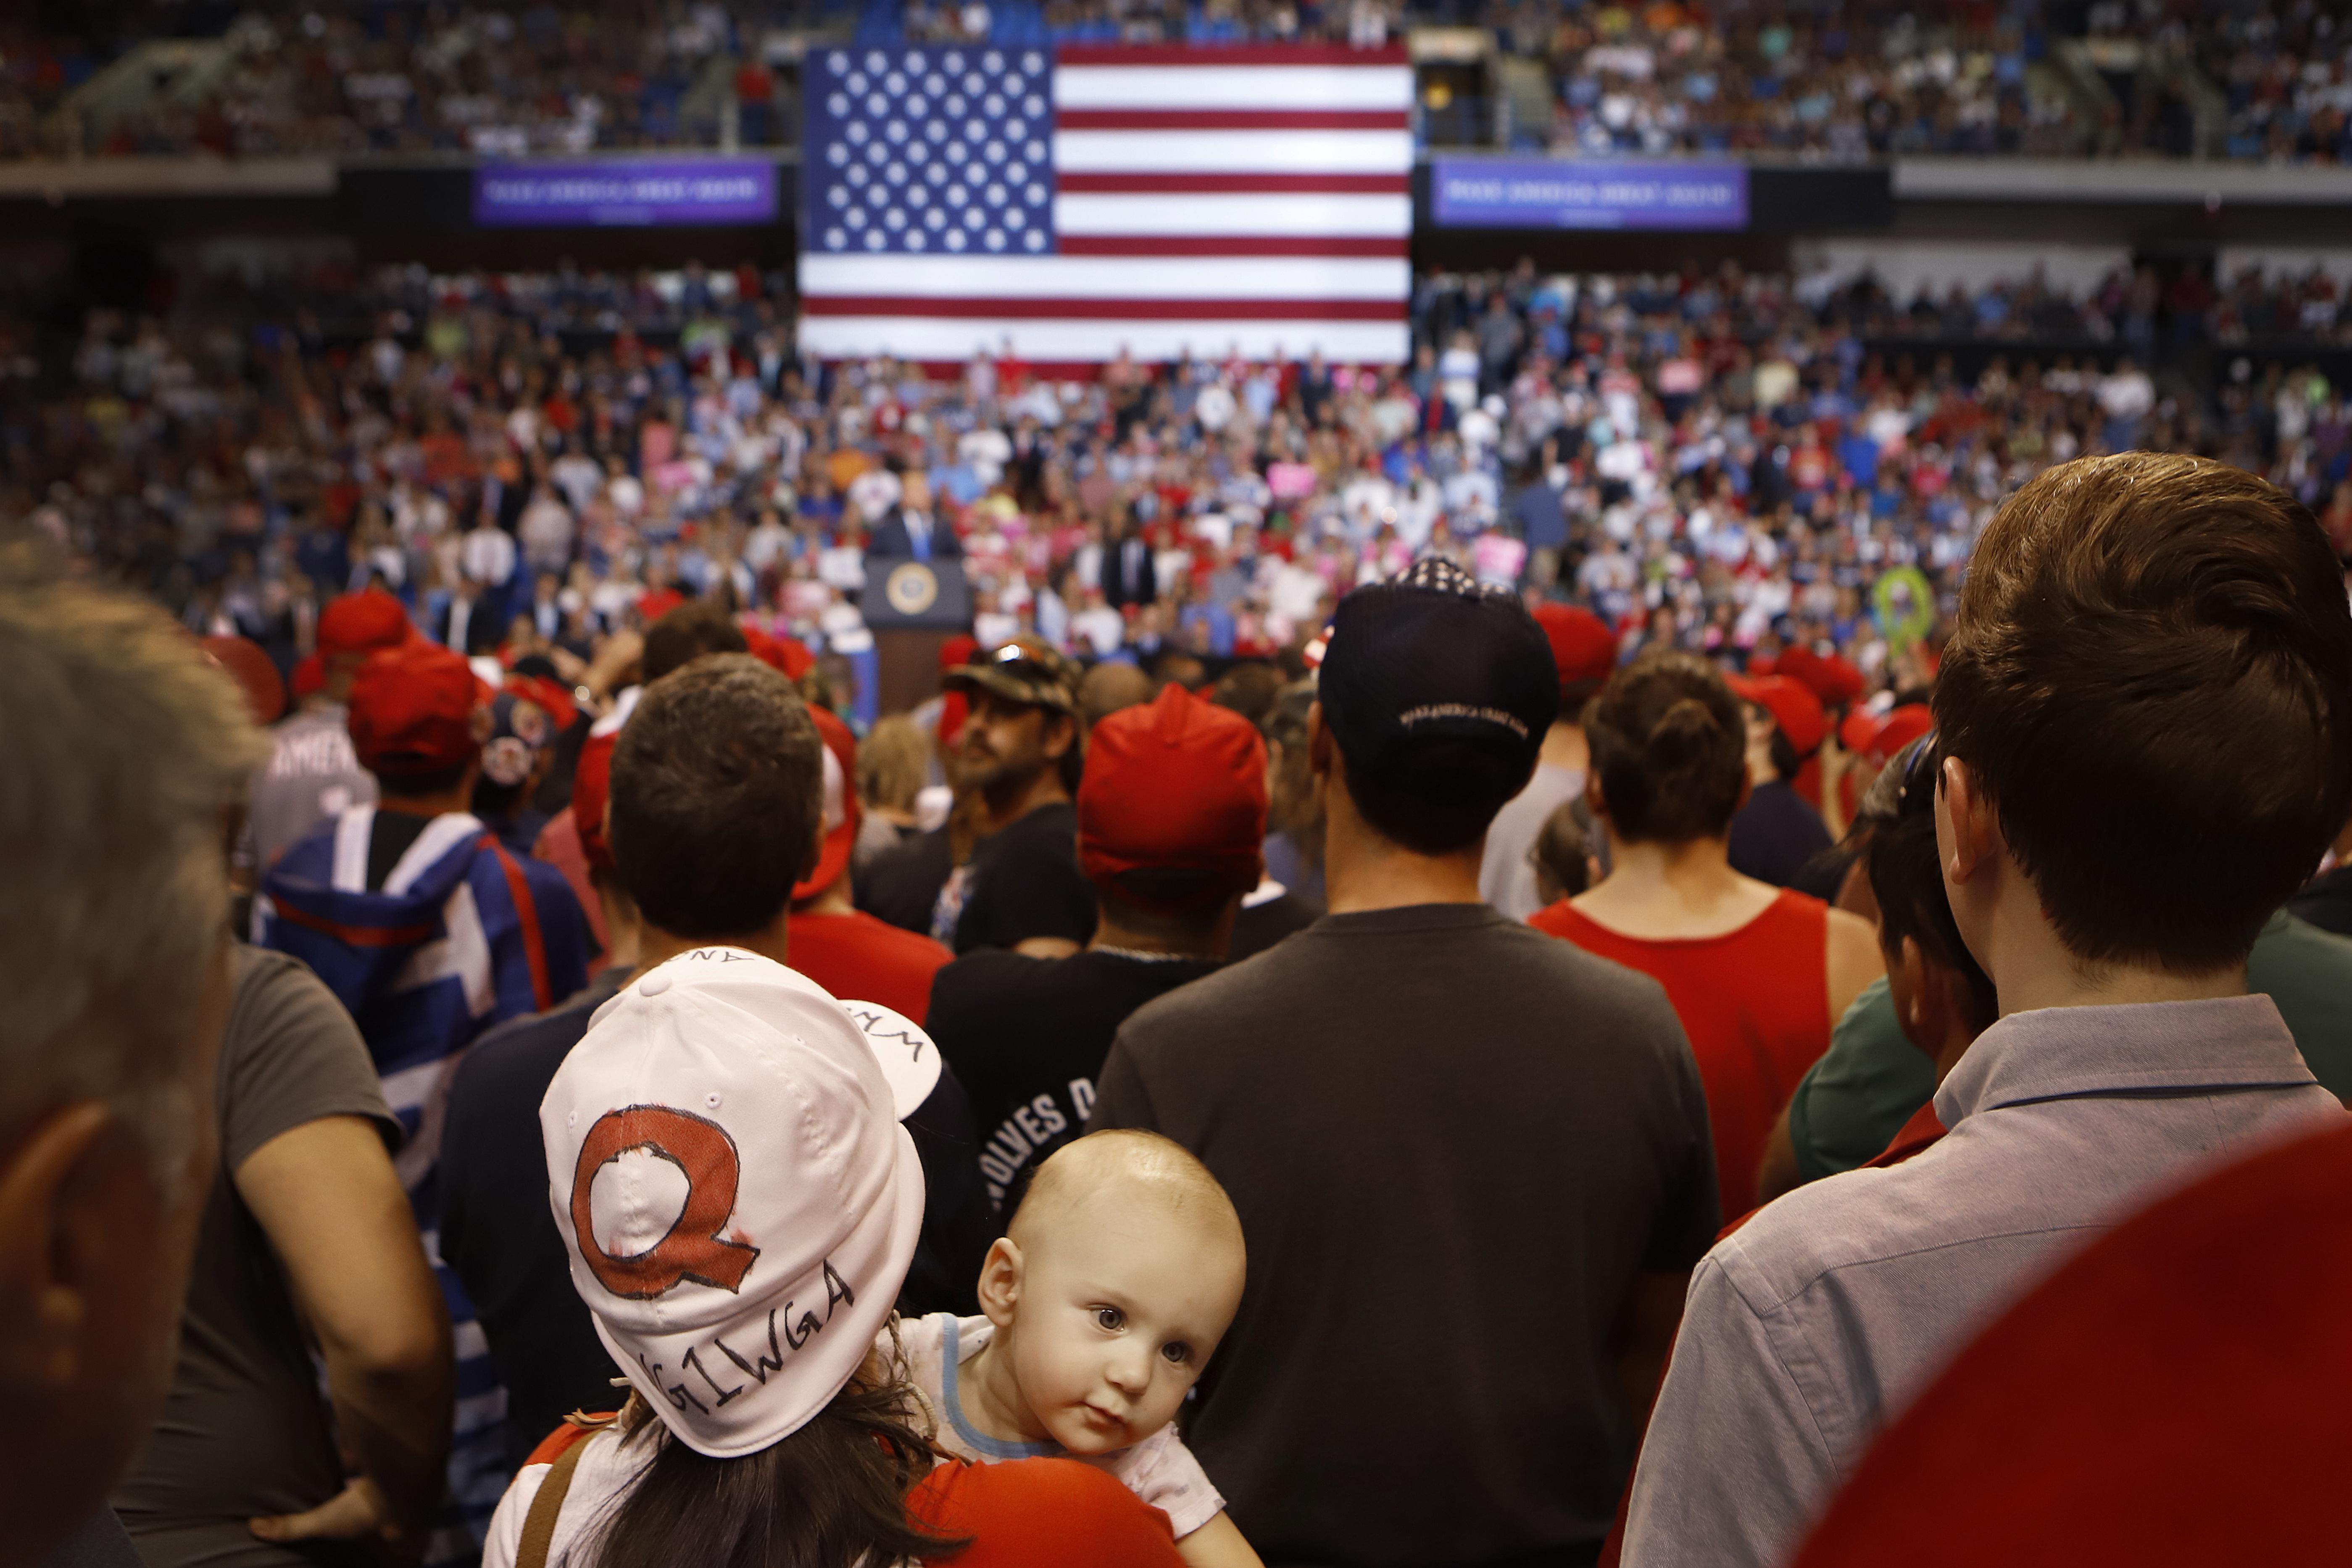 Roxanne Kravitz, wearing a 'Q' hat with her son Indigo, listen to President Donald J. Trump speak to a large crowd on August 2, 2018 at the Mohegan Sun Arena at Casey Plaza in Wilkes Barre, Pennsylvania. 'Q' represents QAnon, a conspiracy theory group that has been seen at recent rallies.  (Photo by Rick Loomis/Getty Images)